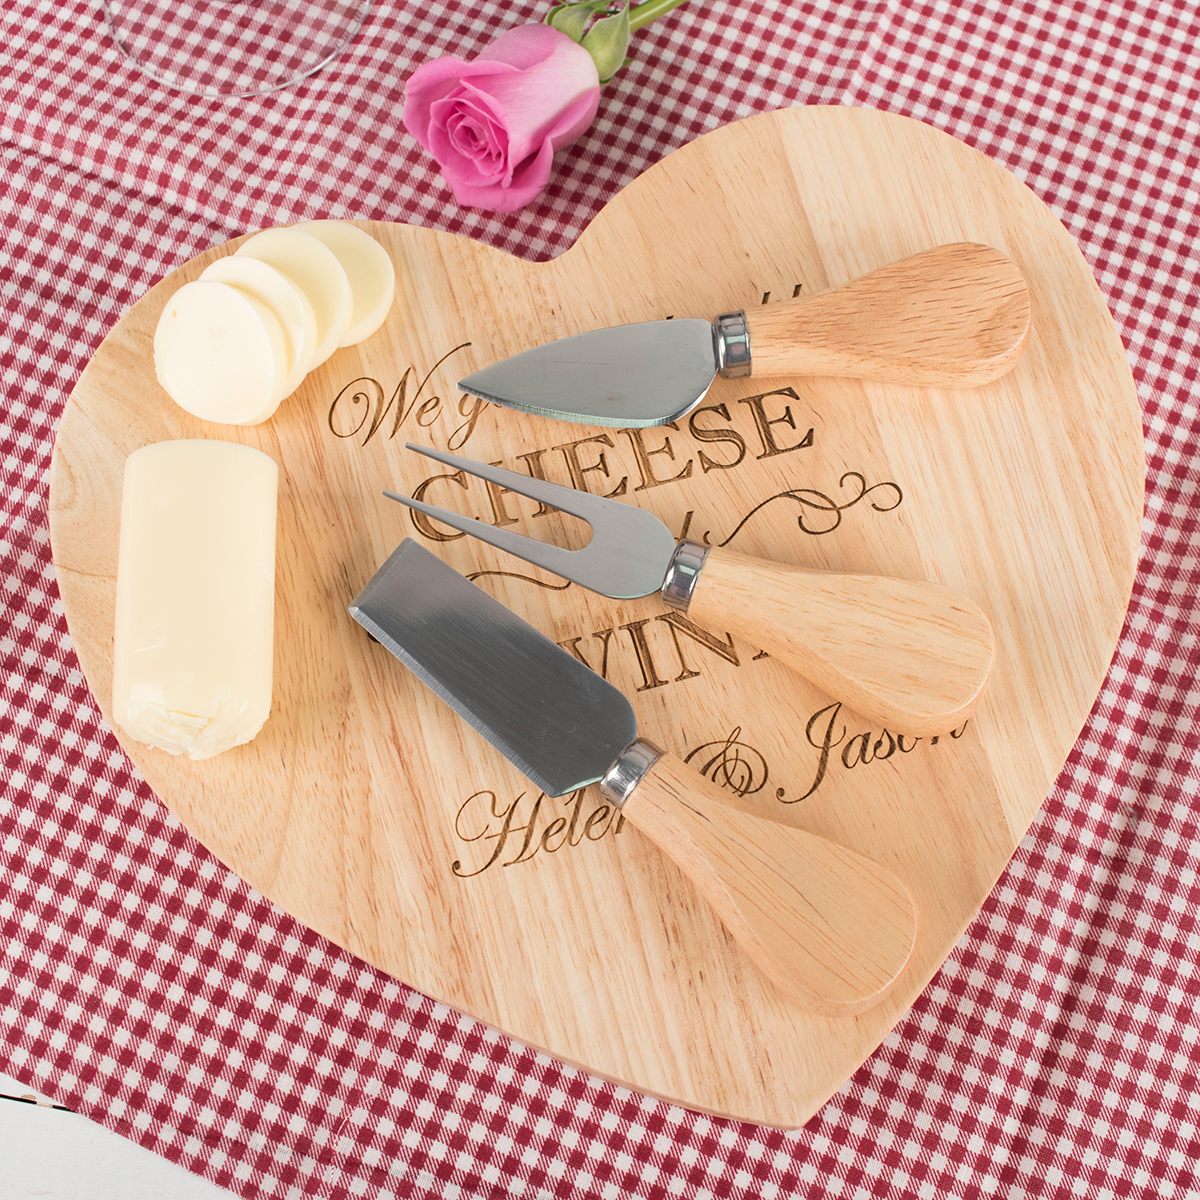 Personalised Engraved Heart-Shaped Wooden Cheeseboard Set - Like Cheese & Wine